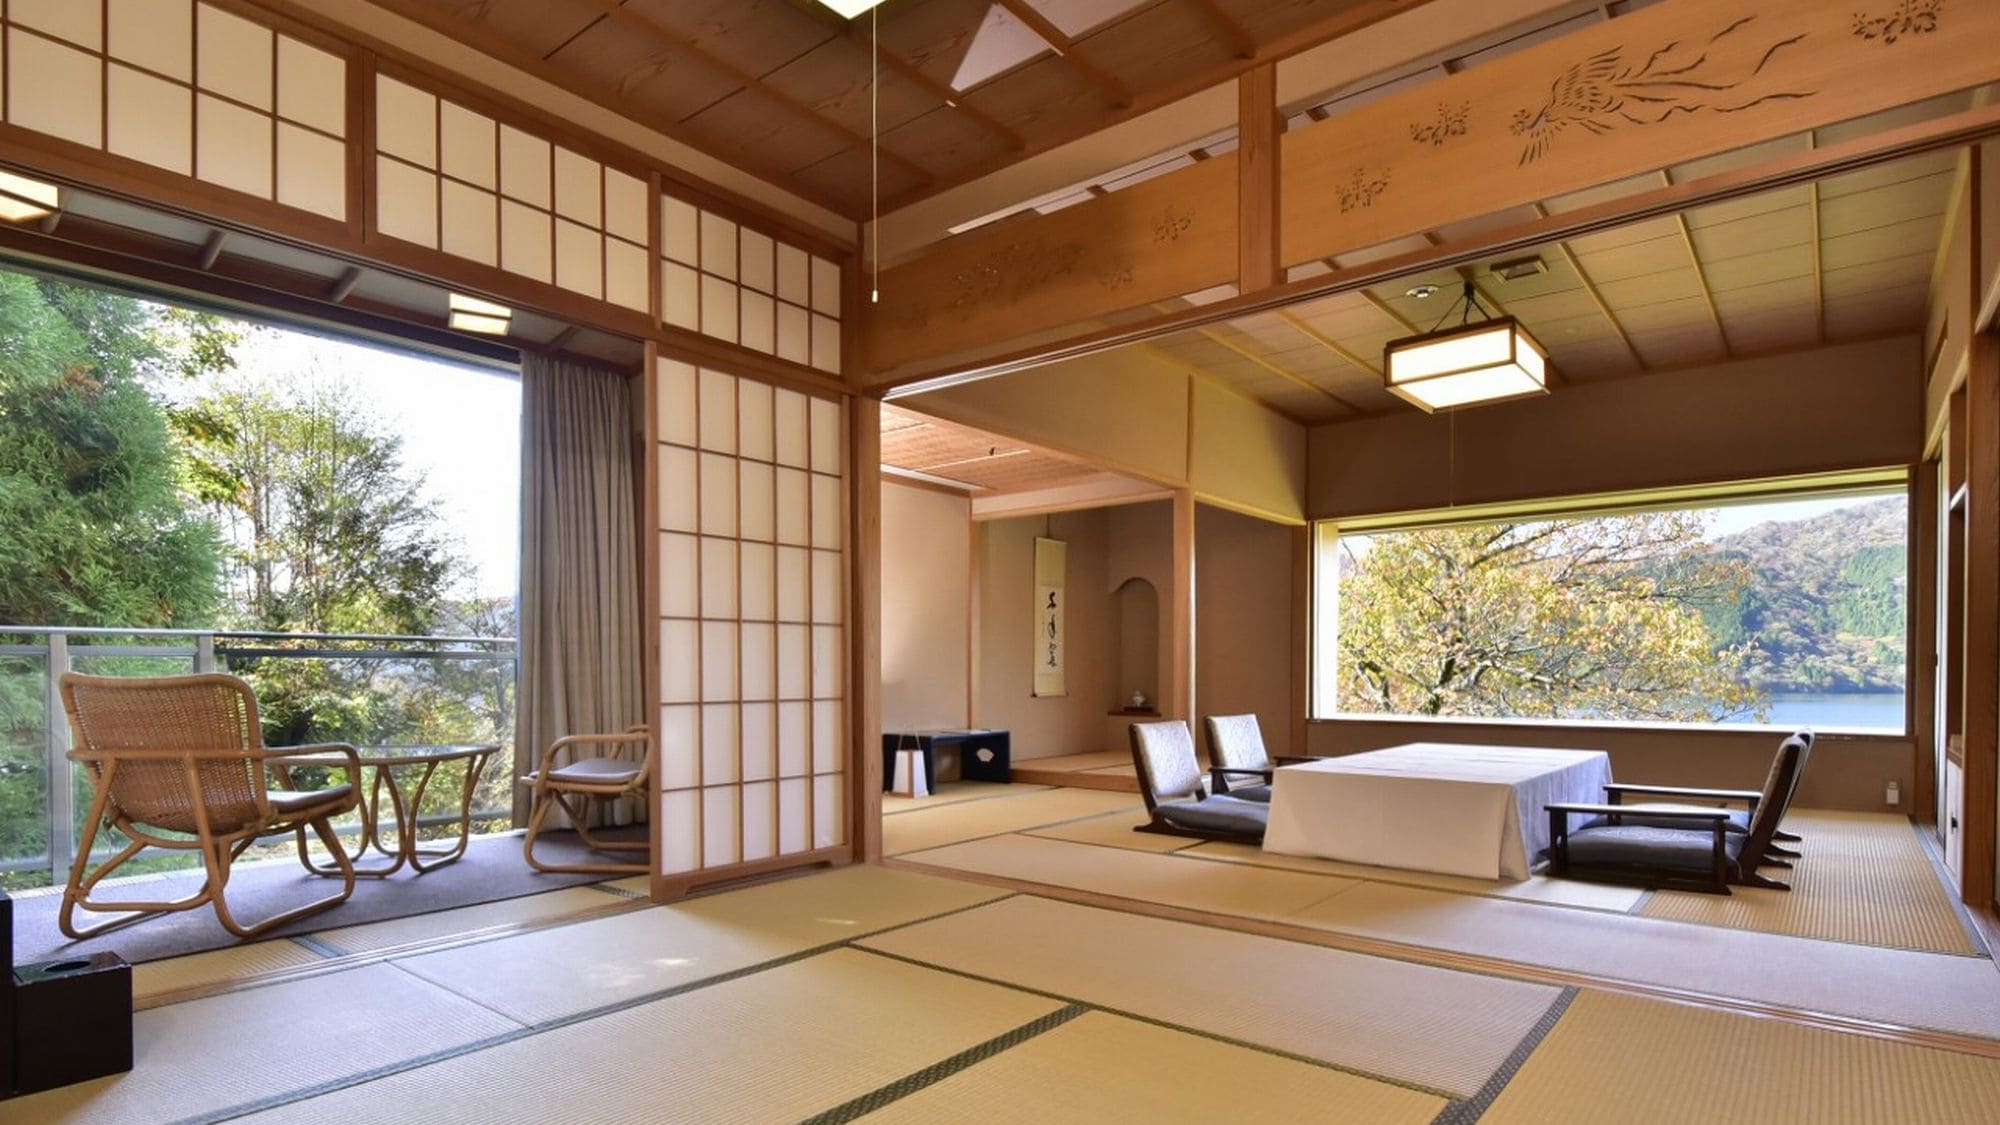 "Lakeside special Japanese-style room overlooking Lake Ashi with hot spring indoor bath"